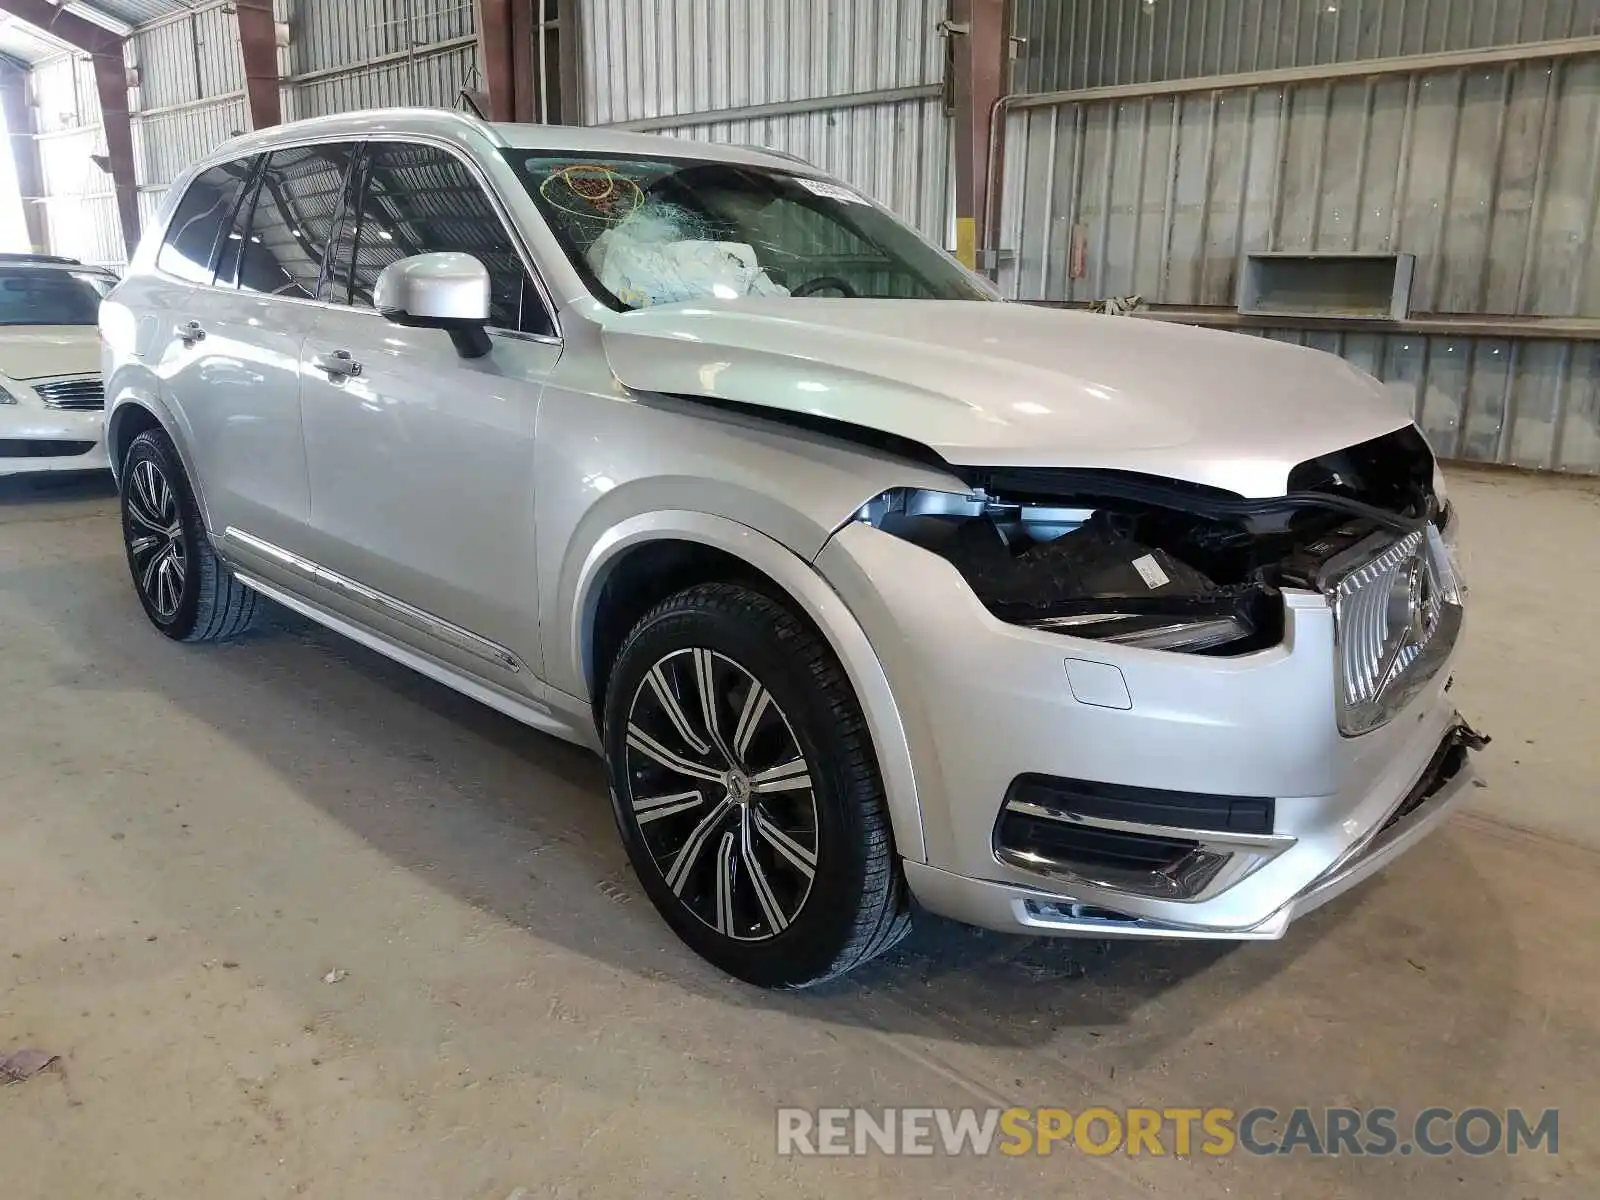 1 Photograph of a damaged car YV4A22PL3L1592953 VOLVO XC90 T6 IN 2020